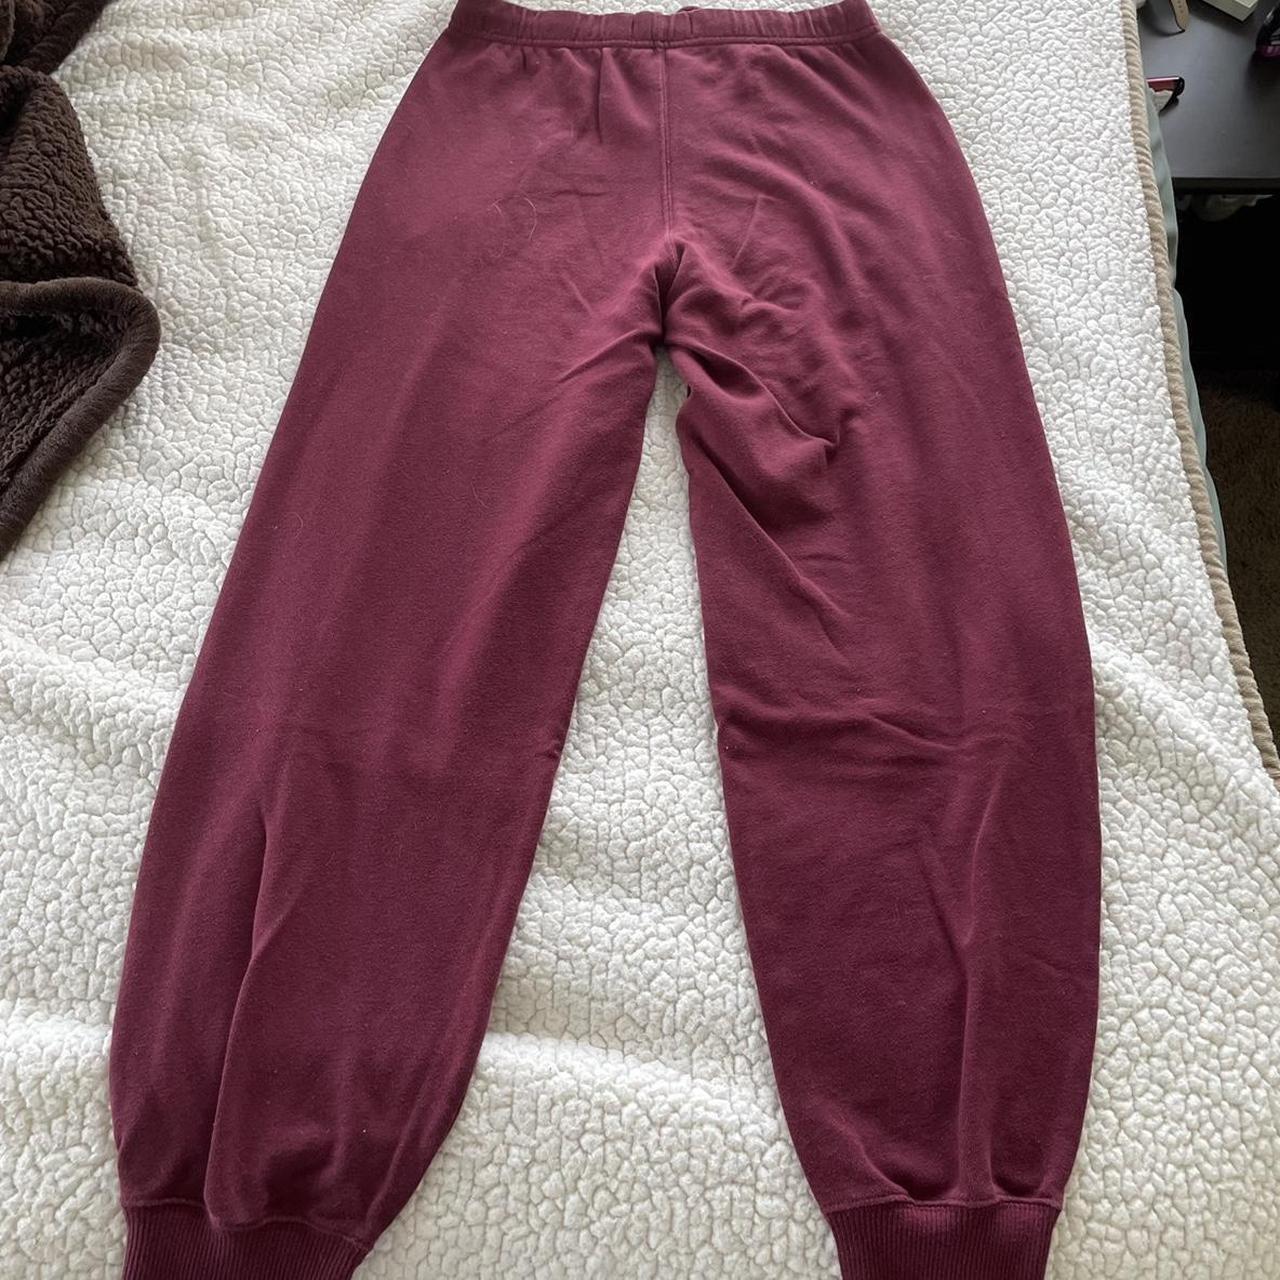 Hollister Sweatpants Red Size XS - $8 (77% Off Retail) - From lily